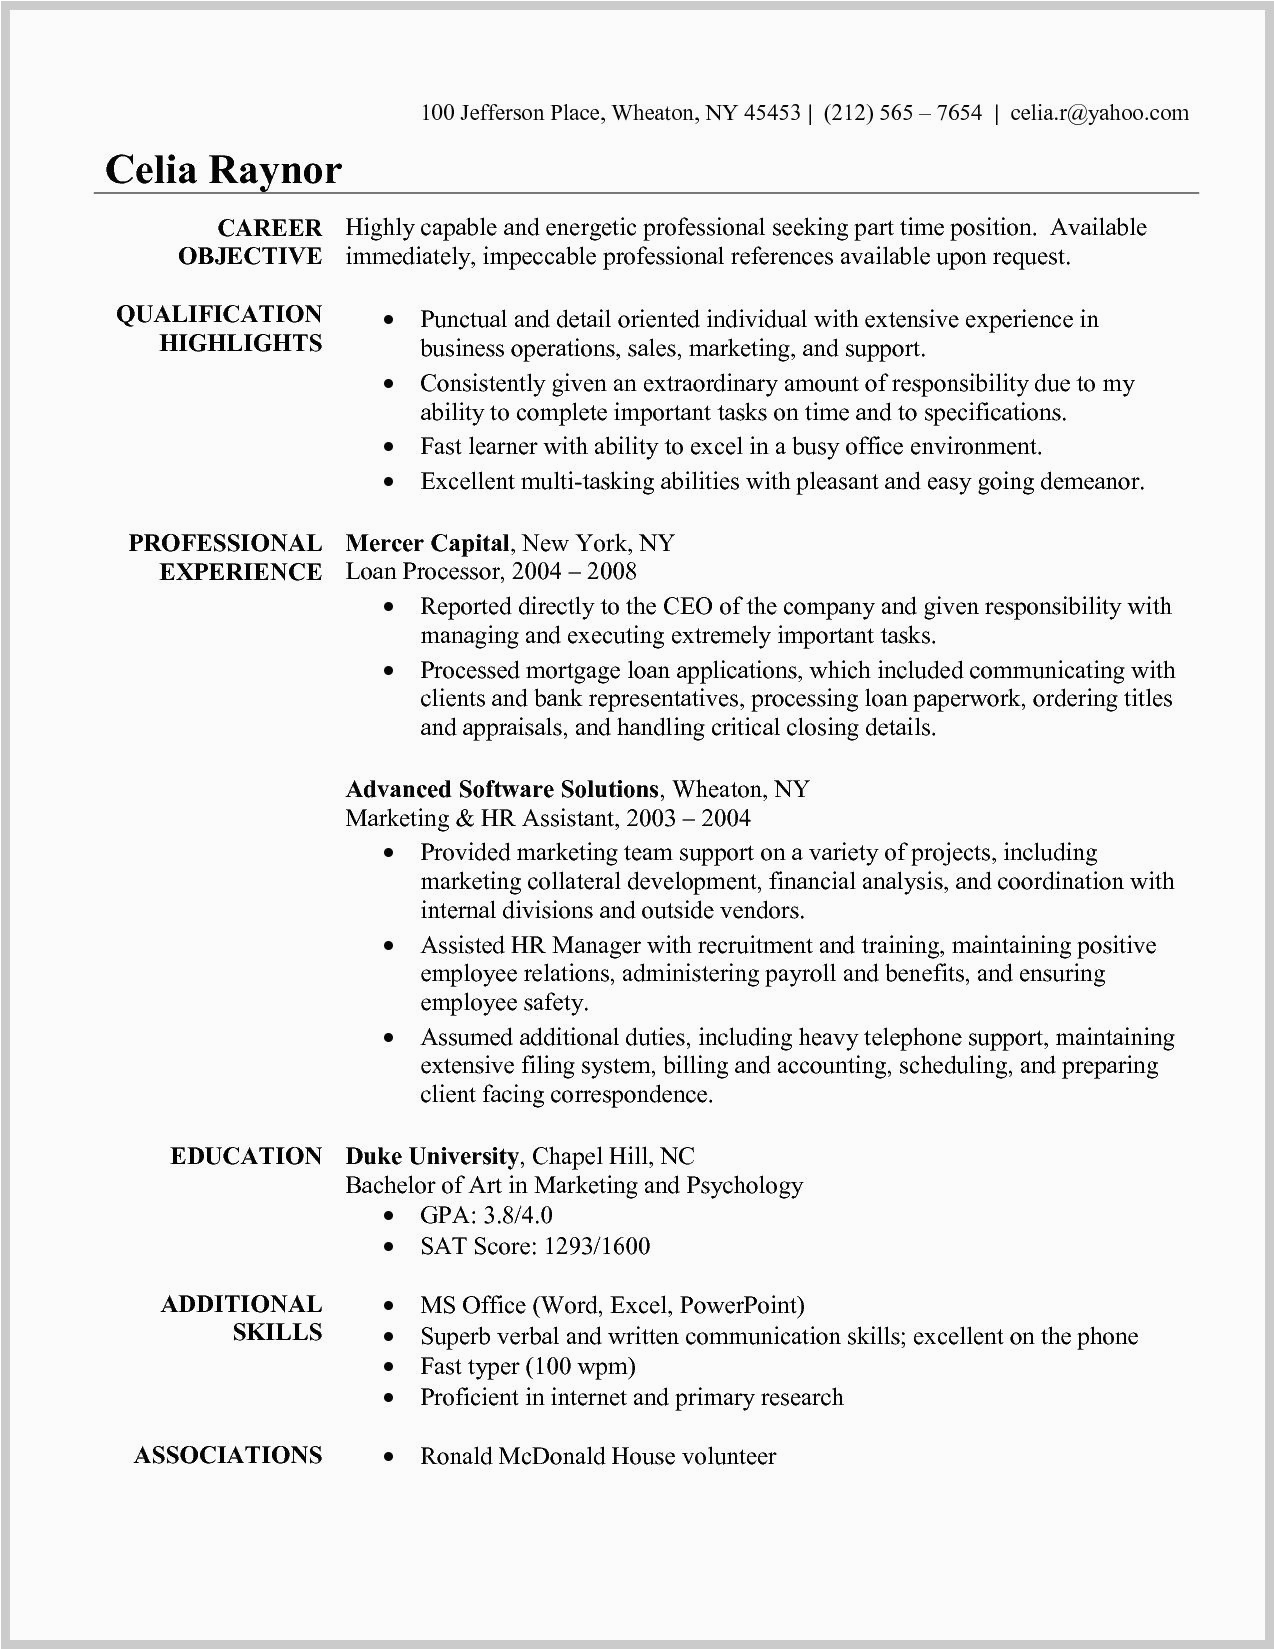 Quick Job Objectives for A Resume Samples Resume Examples Quick Learner Examples Learner Quick Resume